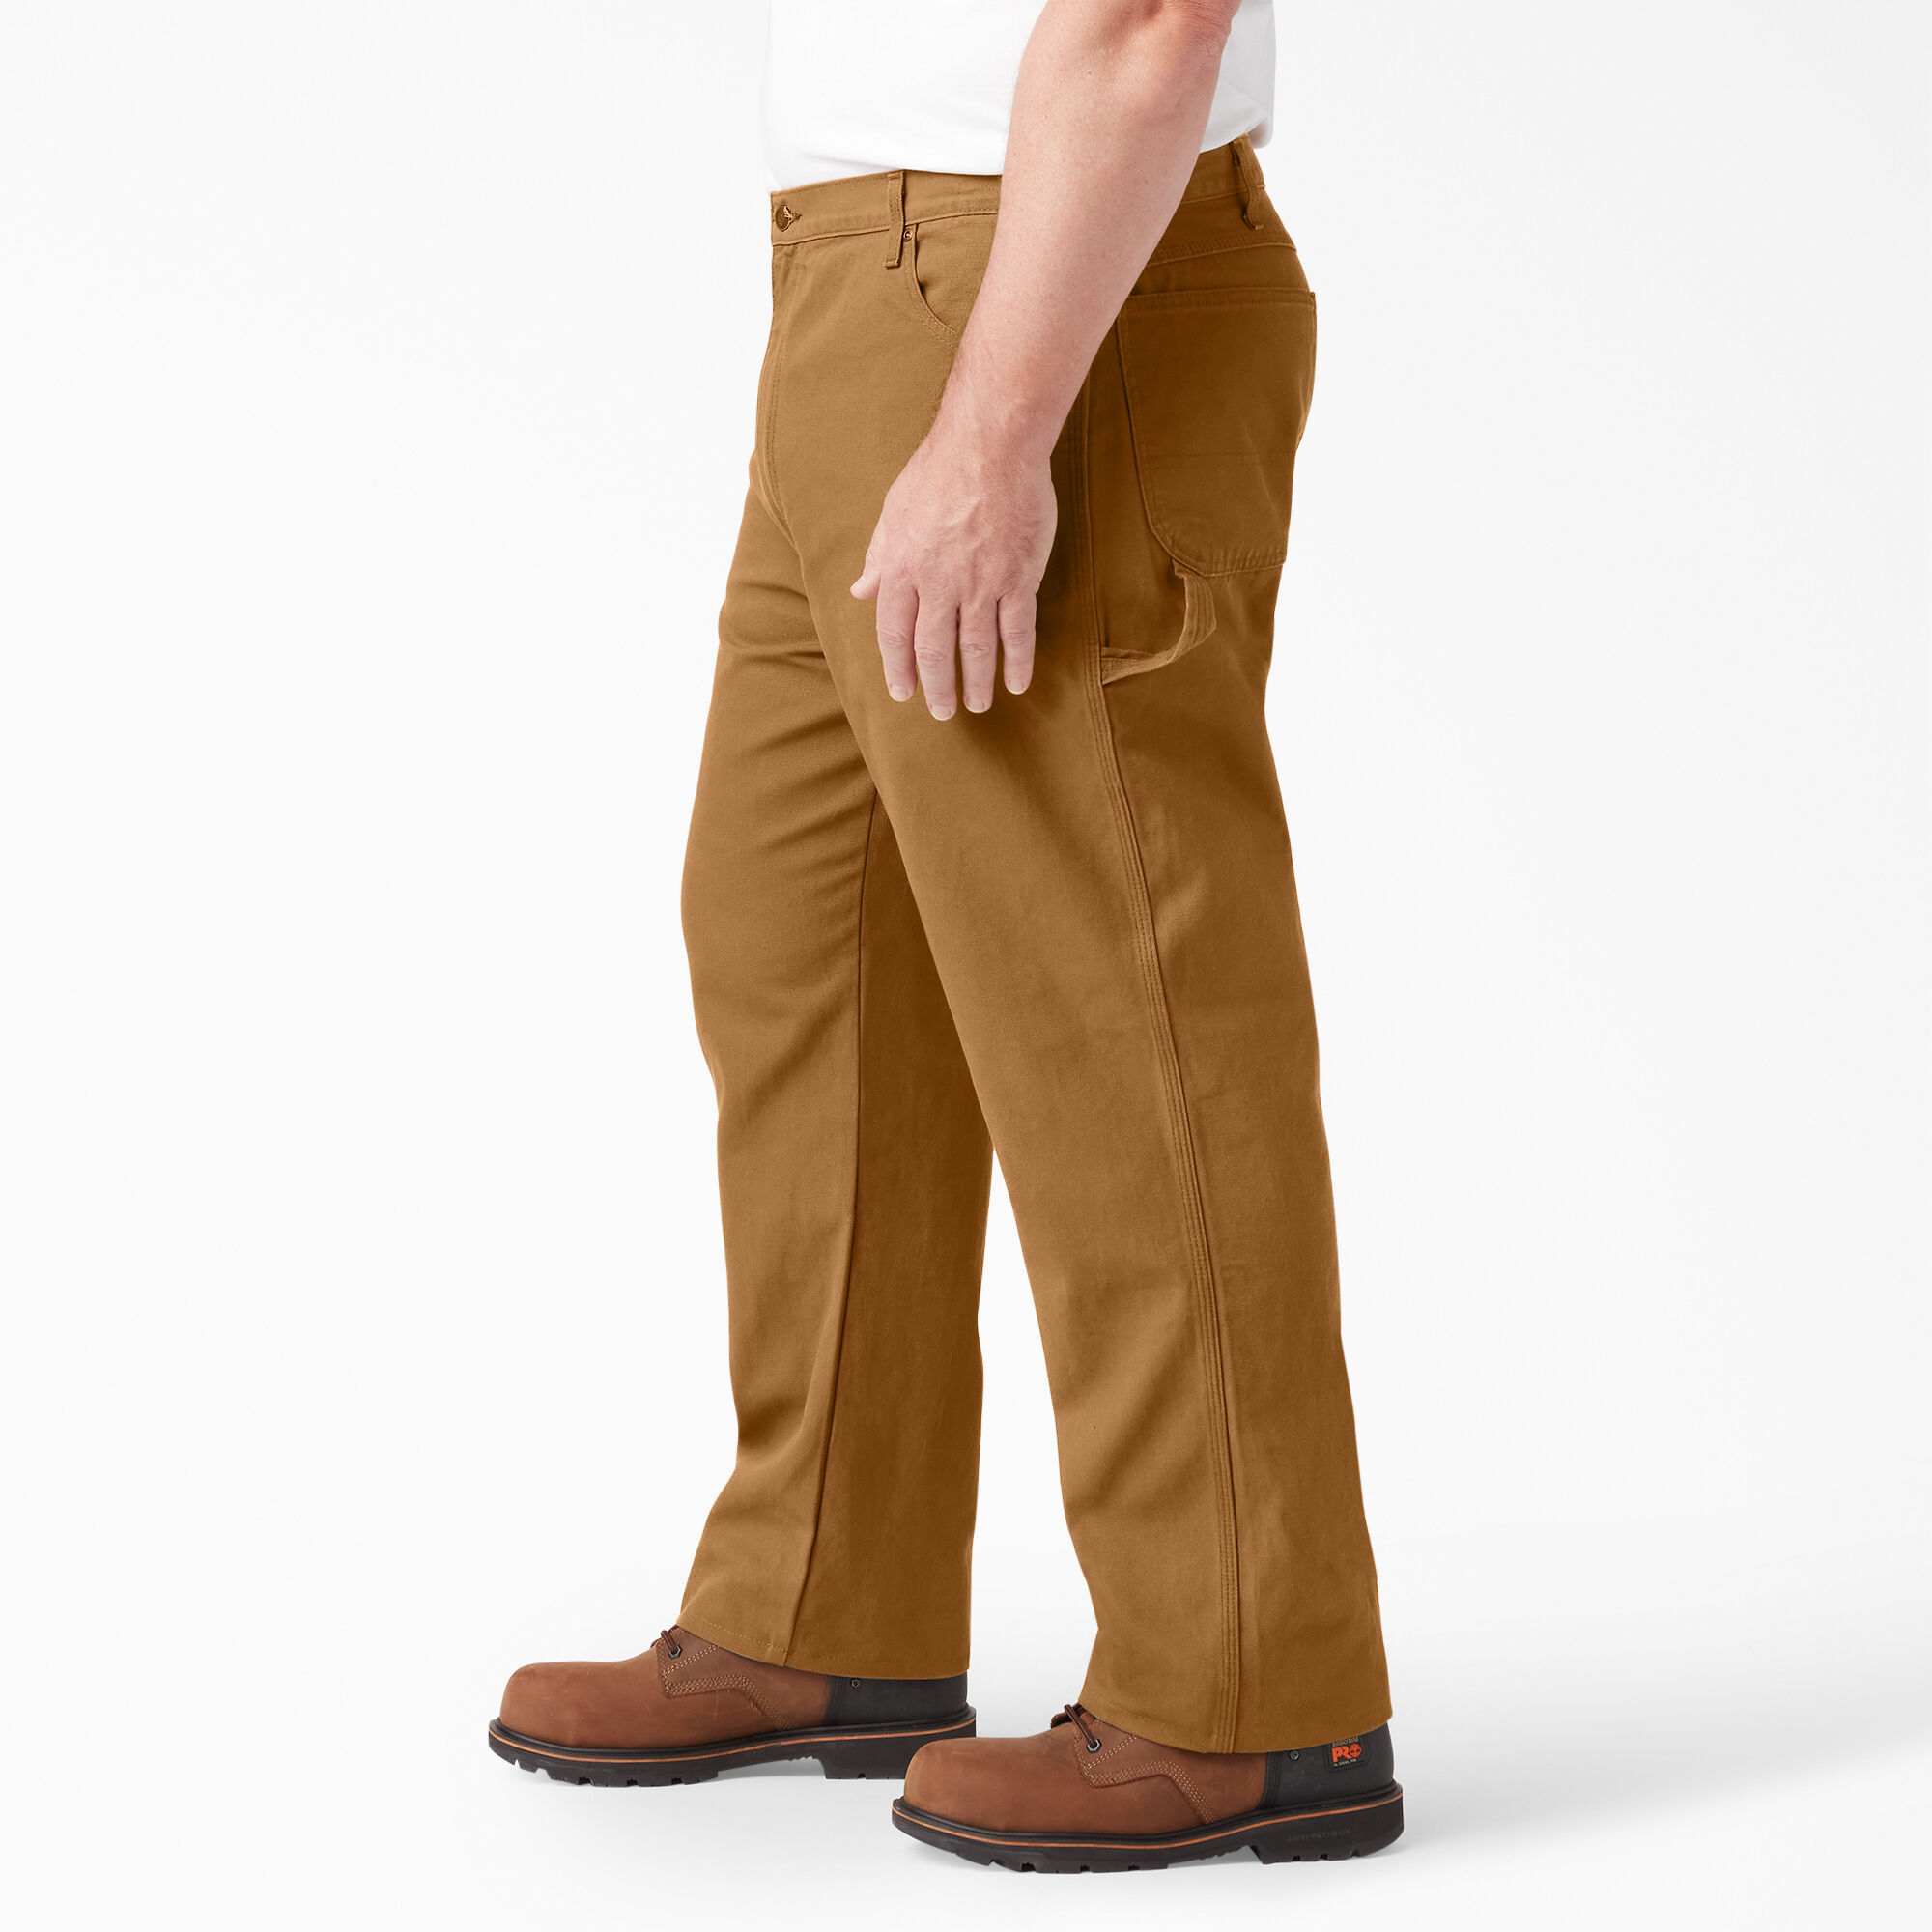 Visiter la boutique DickiesDickies Le DU250 homme Relaxed Straight Fit Lightweight Canard Carpenter Jean 40W x 30L Brown Duck 